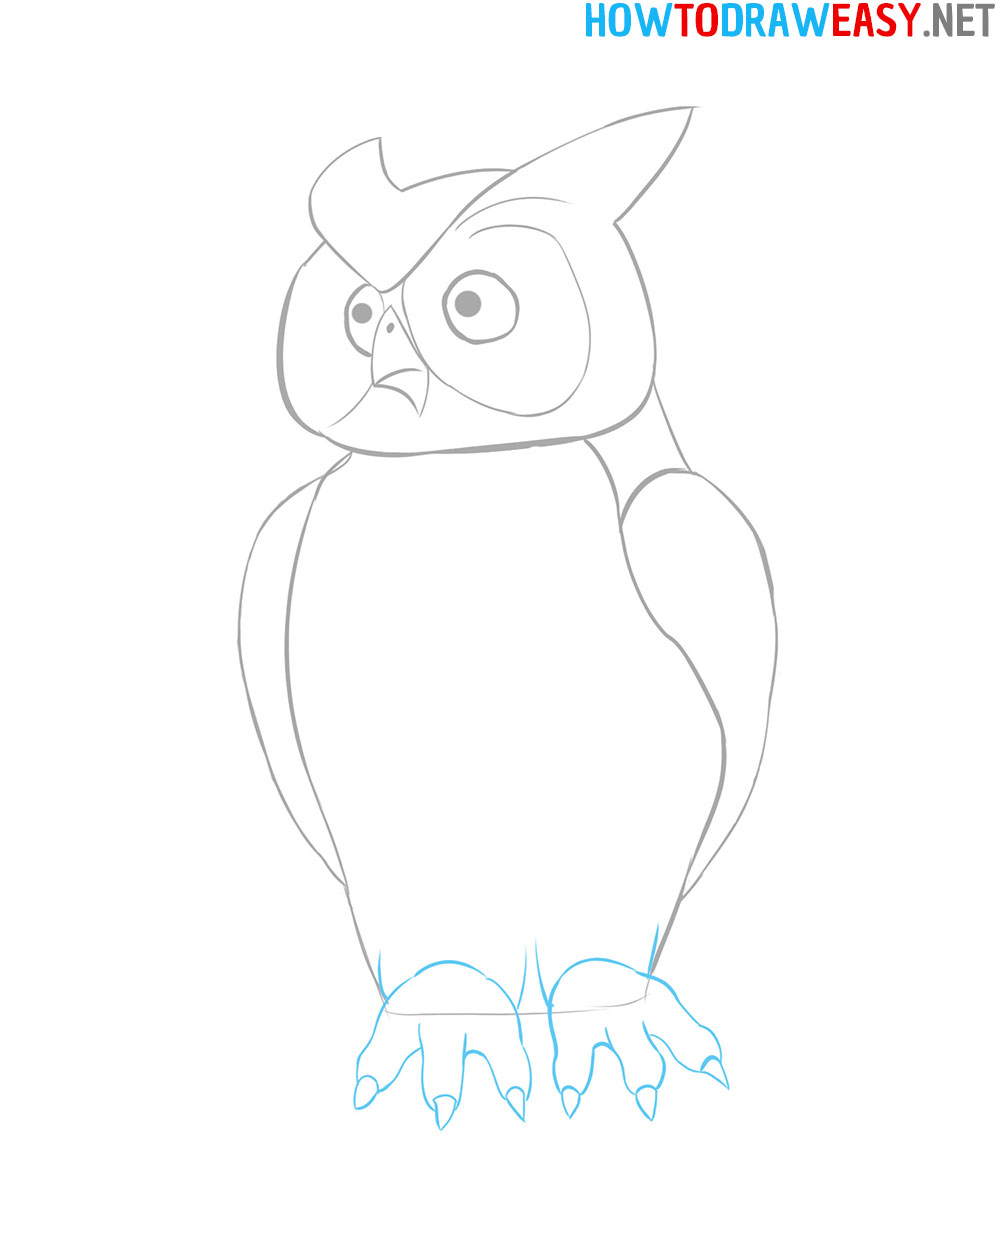 How to Draw Easy Owl